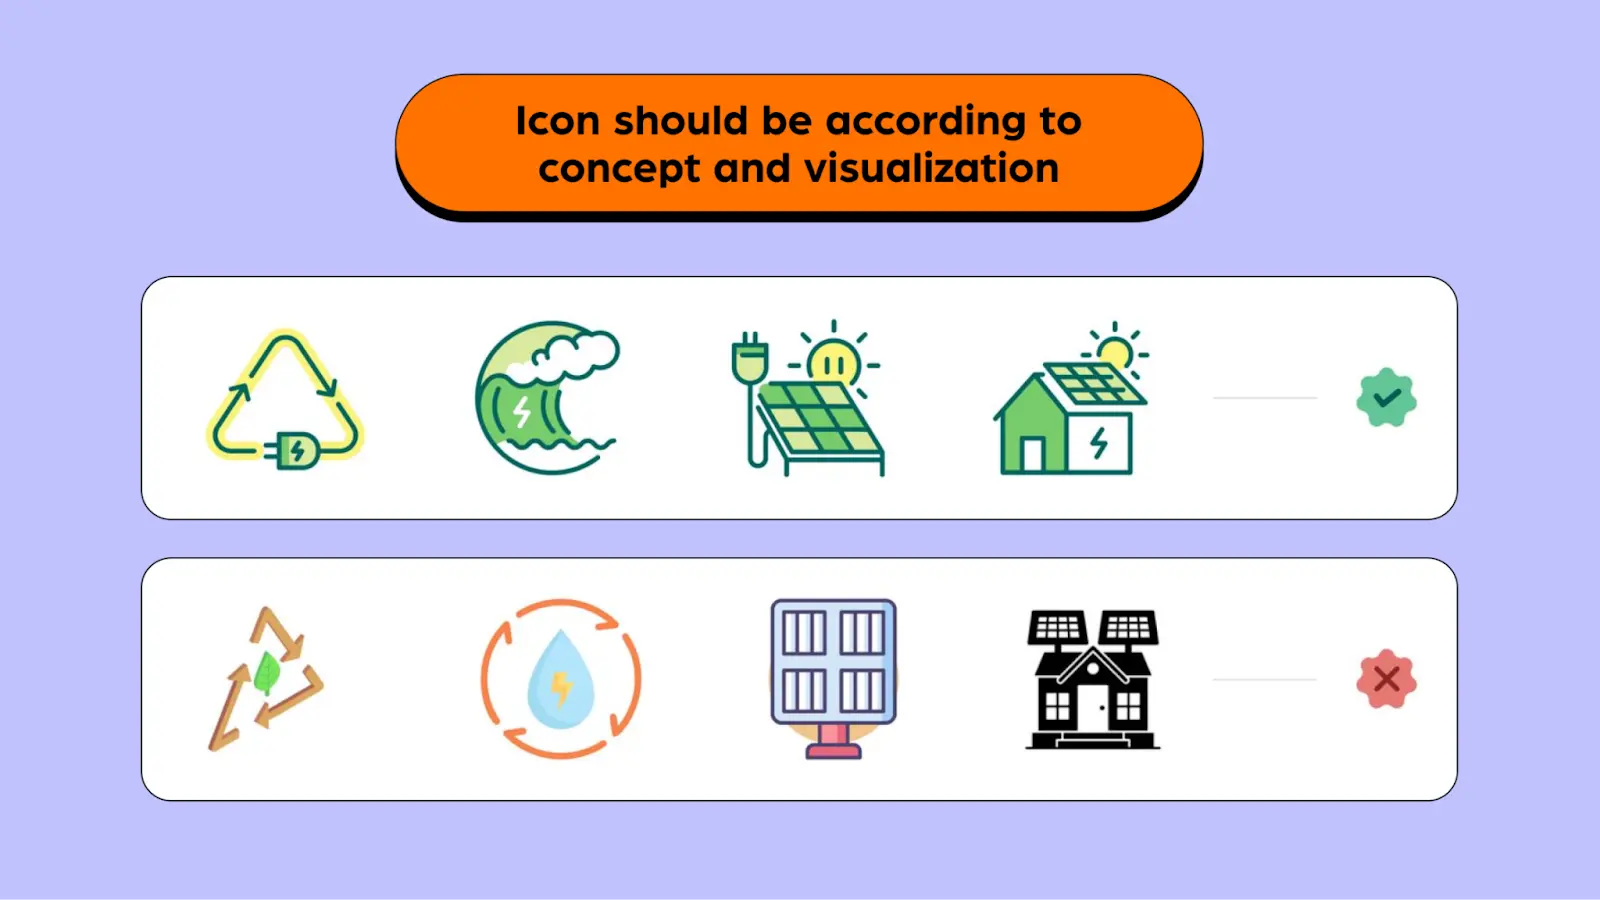 How icons should look like according to a certain concept